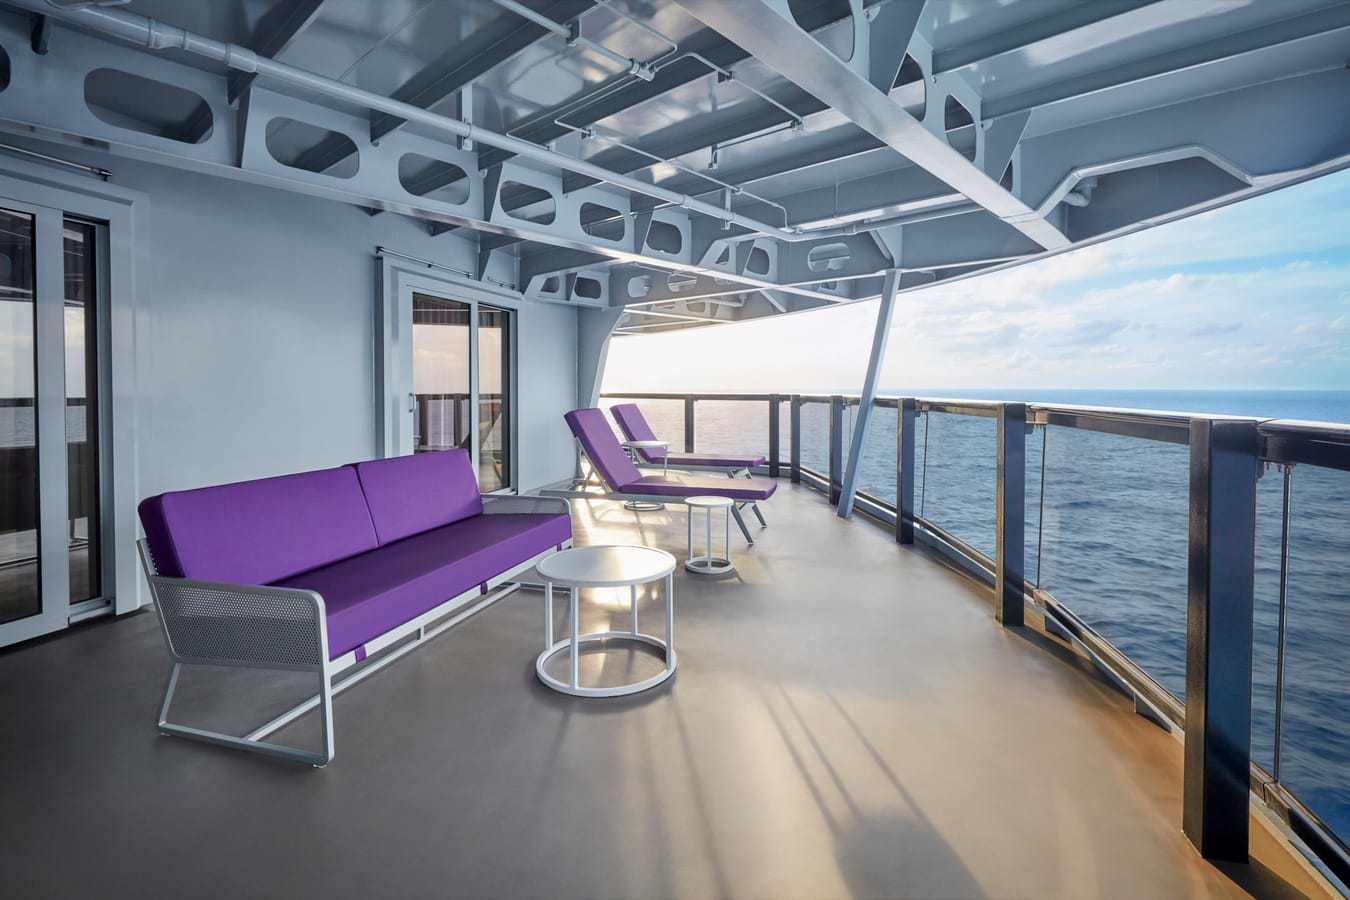 Located on the aft decks, these Cheeky Corners offer panoramic views, and so much space you may forget there’s a ship to explore.